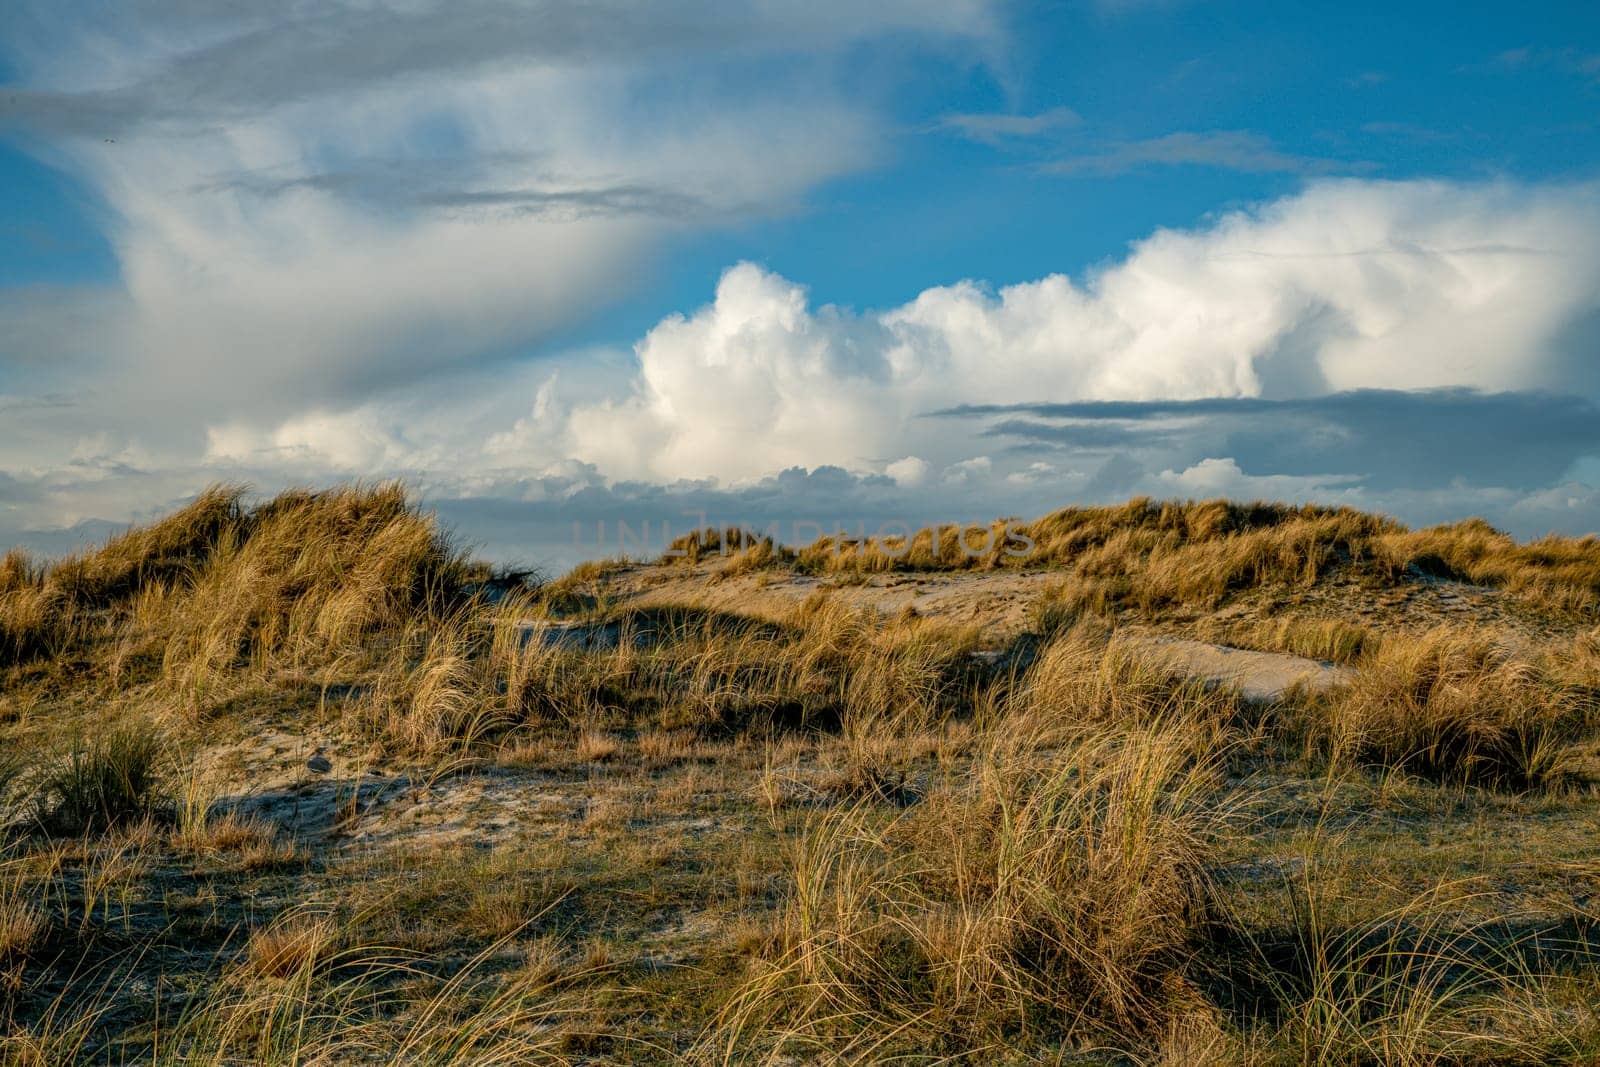 beautiful sand dunes formed by the wind on the beach of the Wadden Island of Texel with the sea and clouds in the background